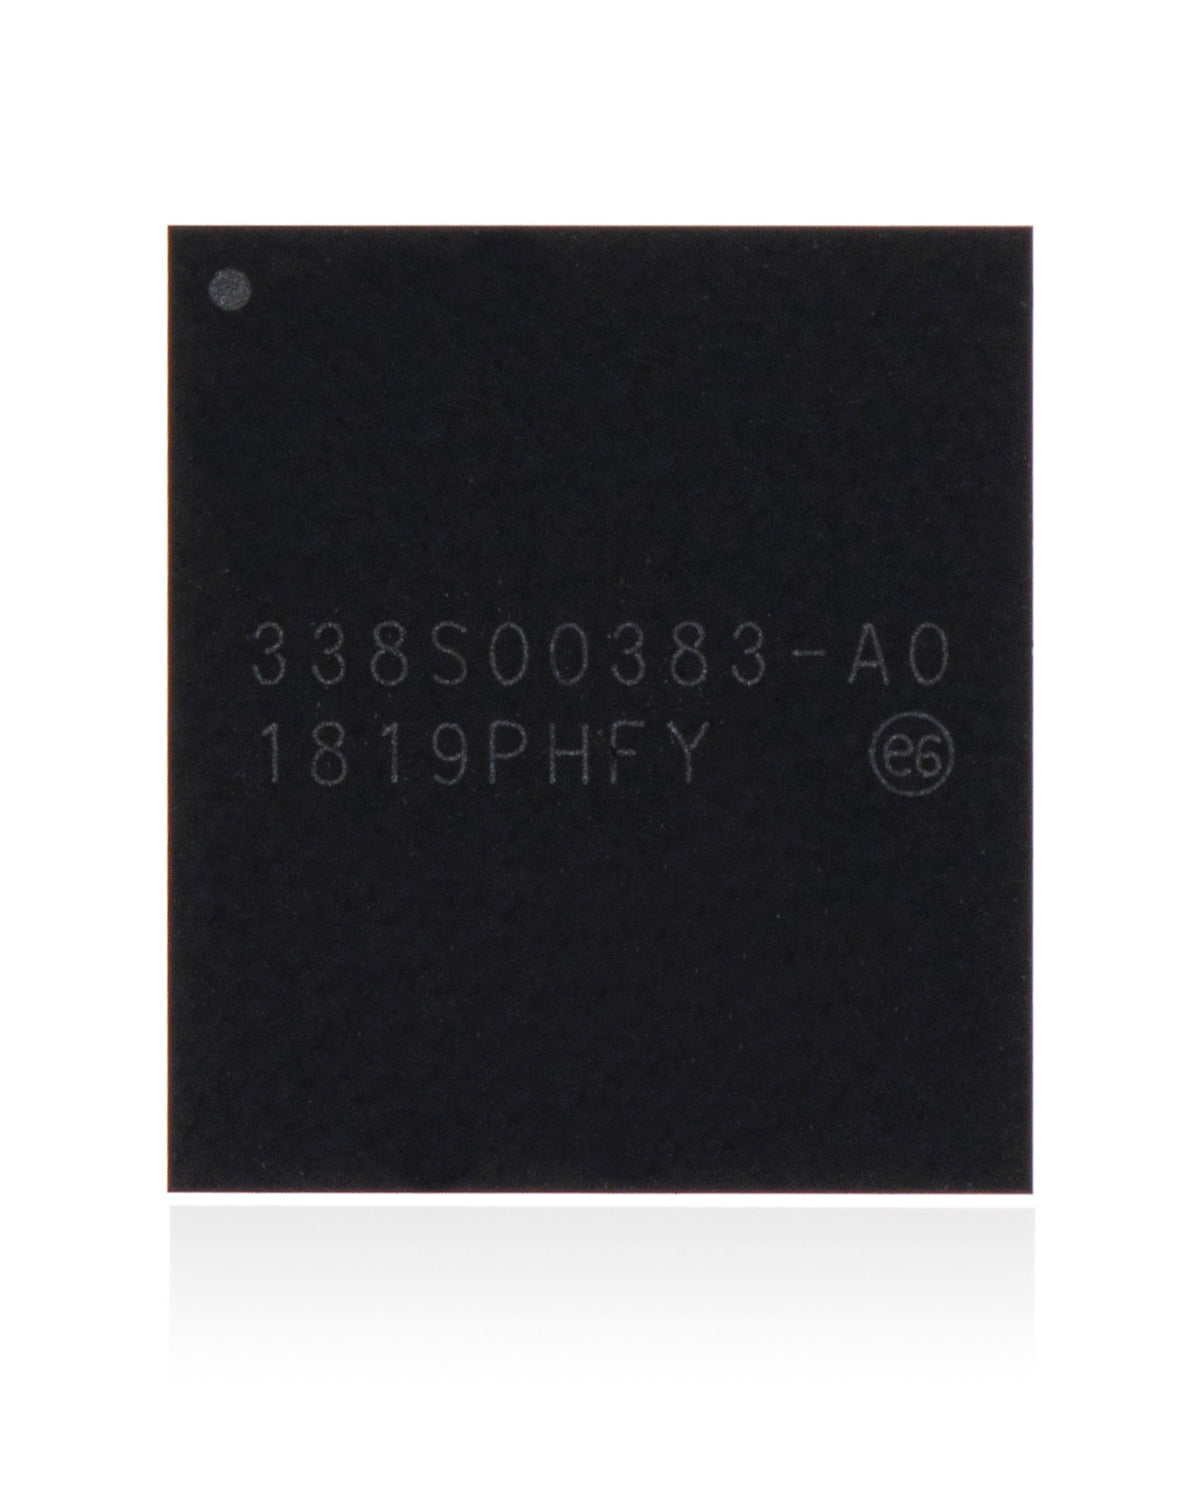 BIG POWER IC COMPATIBLE WITH IPHONE XS / XR (338S00383-A0)